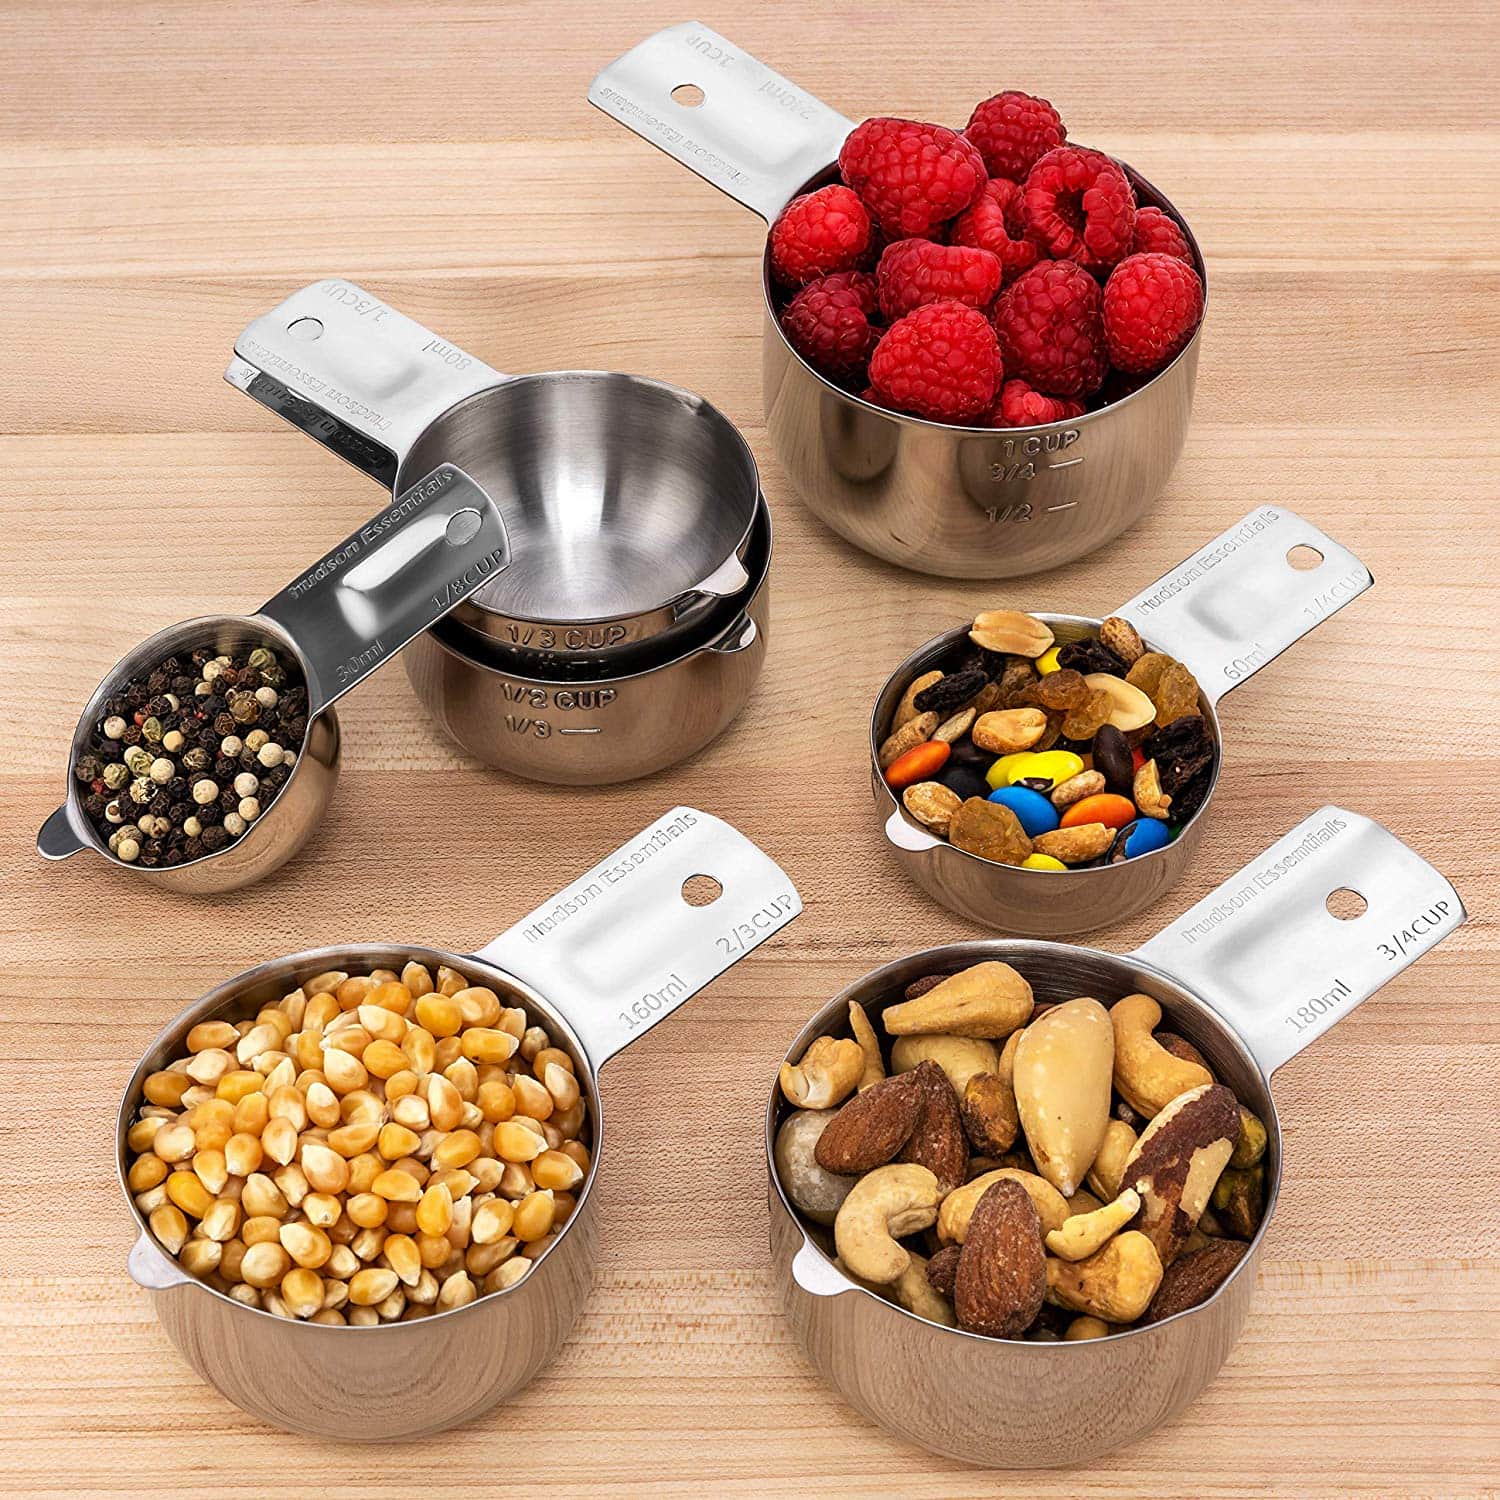 Choice 4-Piece Stainless Steel Measuring Cup Set